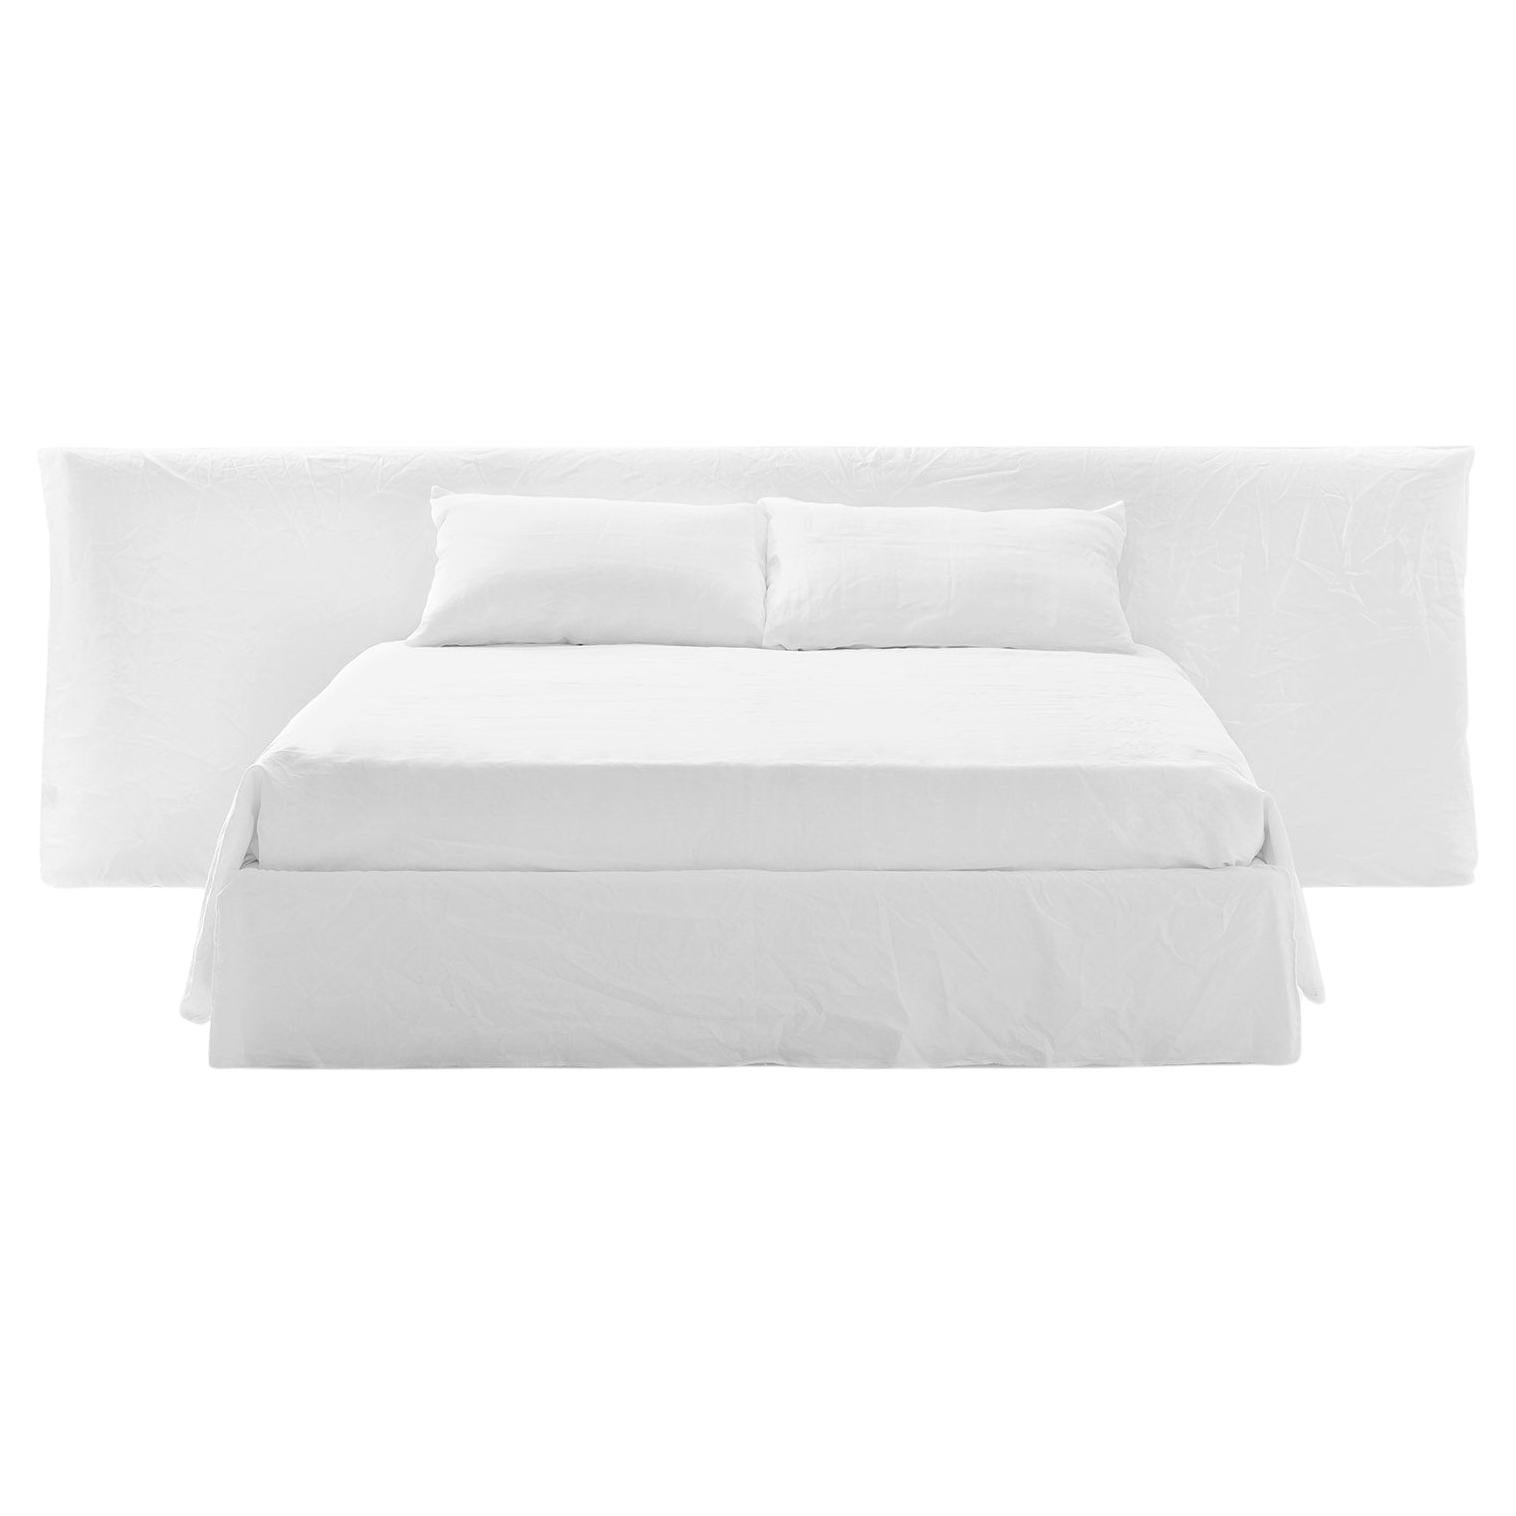 Gervasoni Ghost 81 King Knock Down Bed in White Linen Upholstery by Paola Navone For Sale